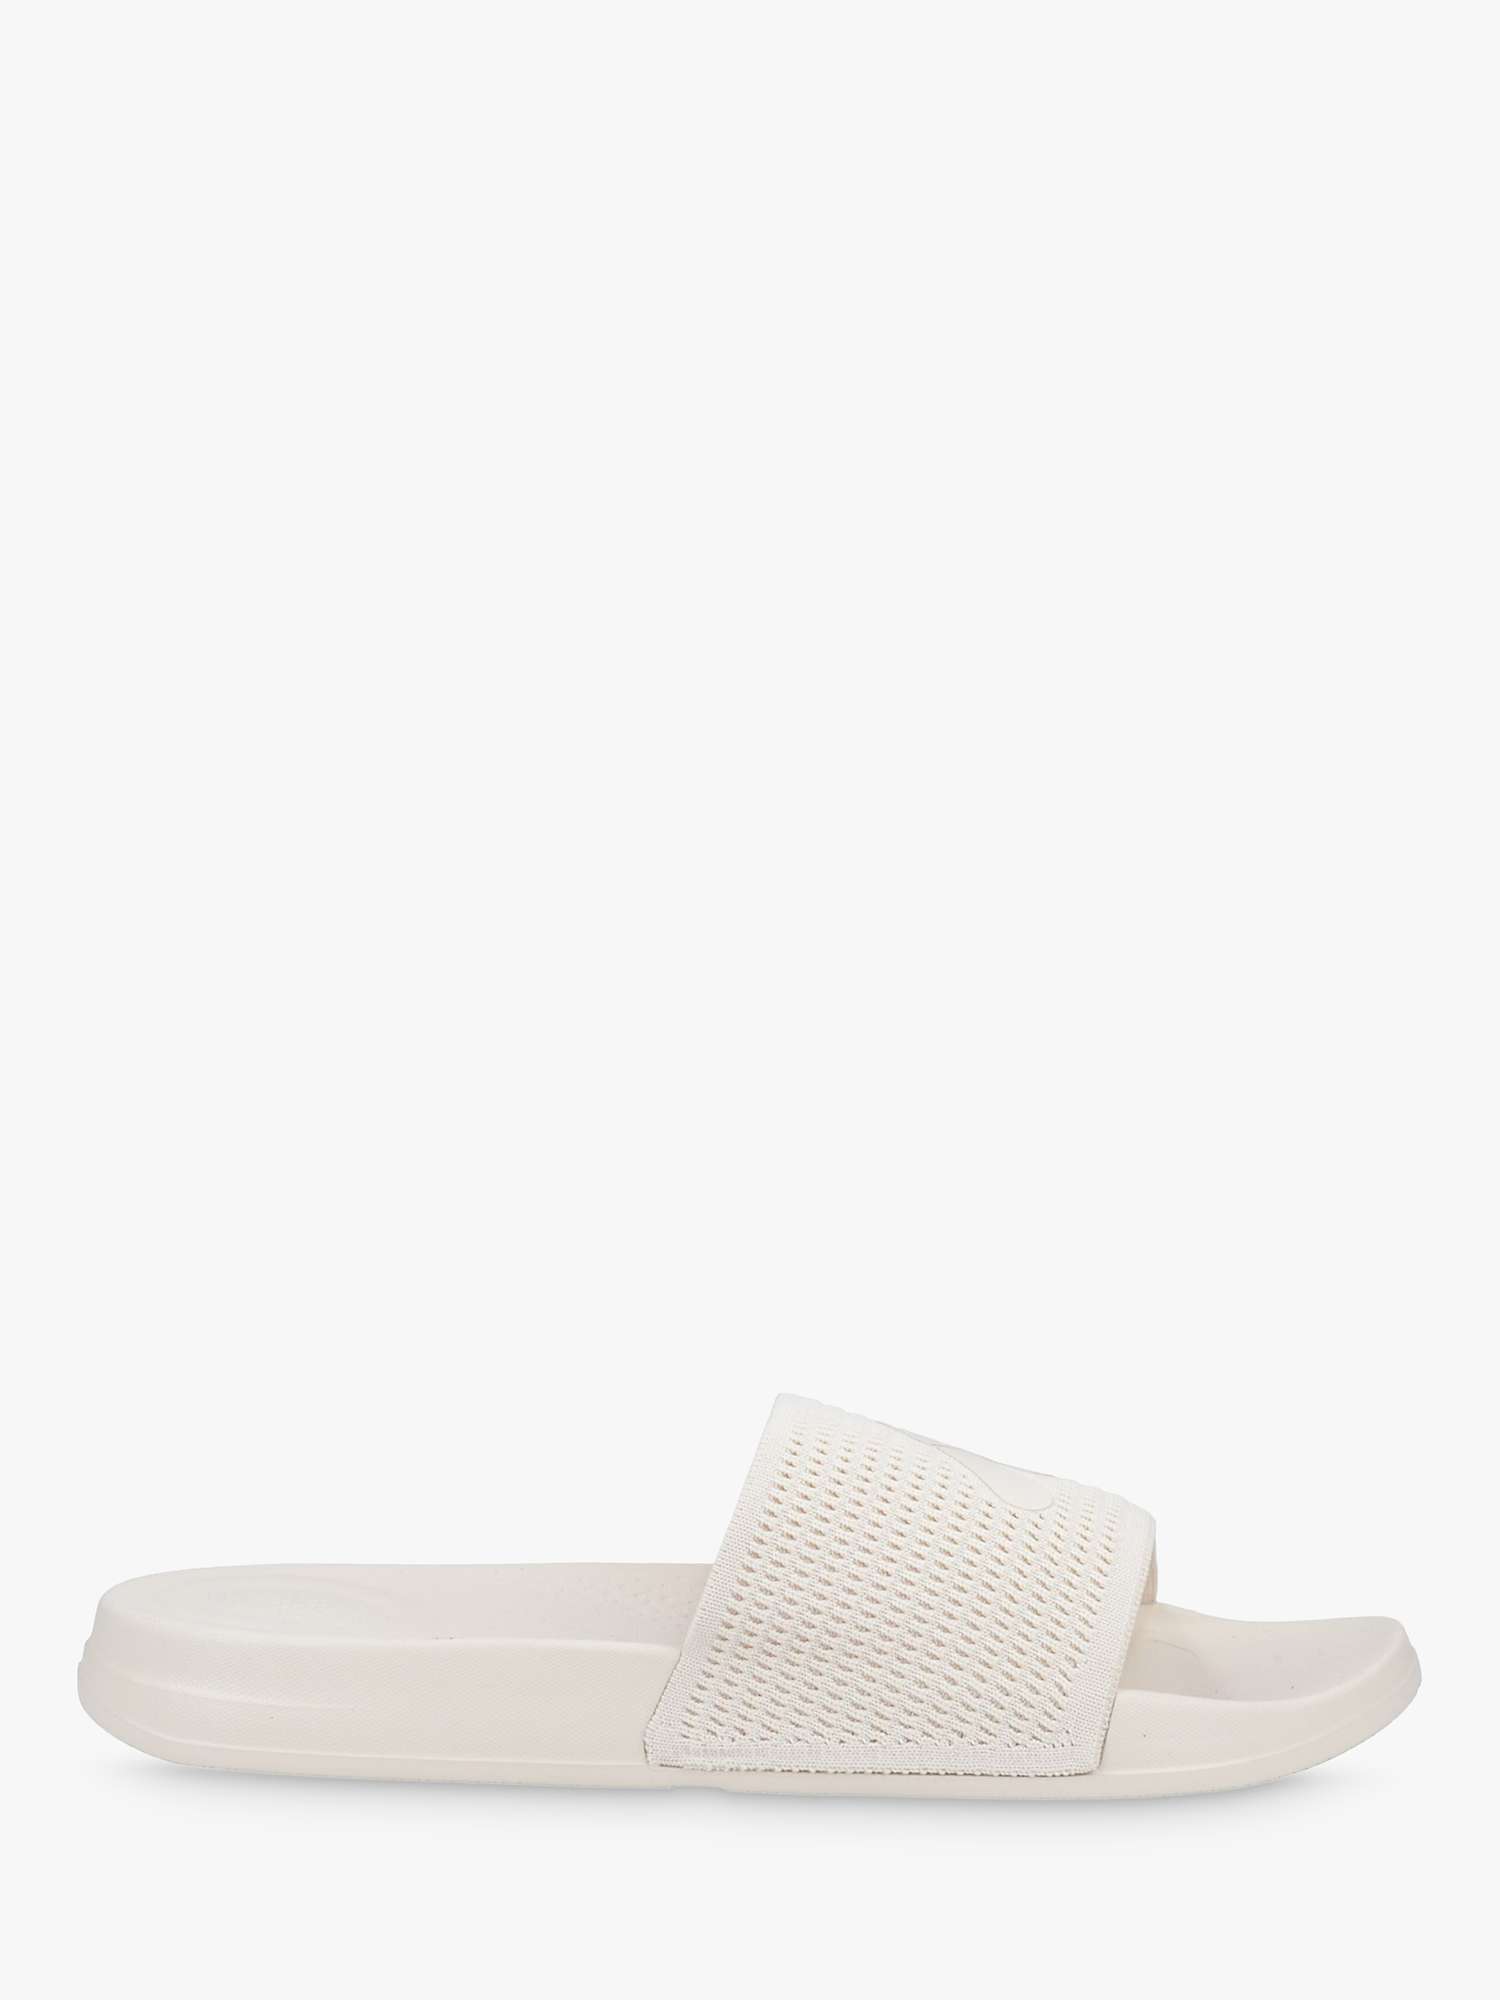 Buy FitFlop iQushion Arrow Sliders Online at johnlewis.com